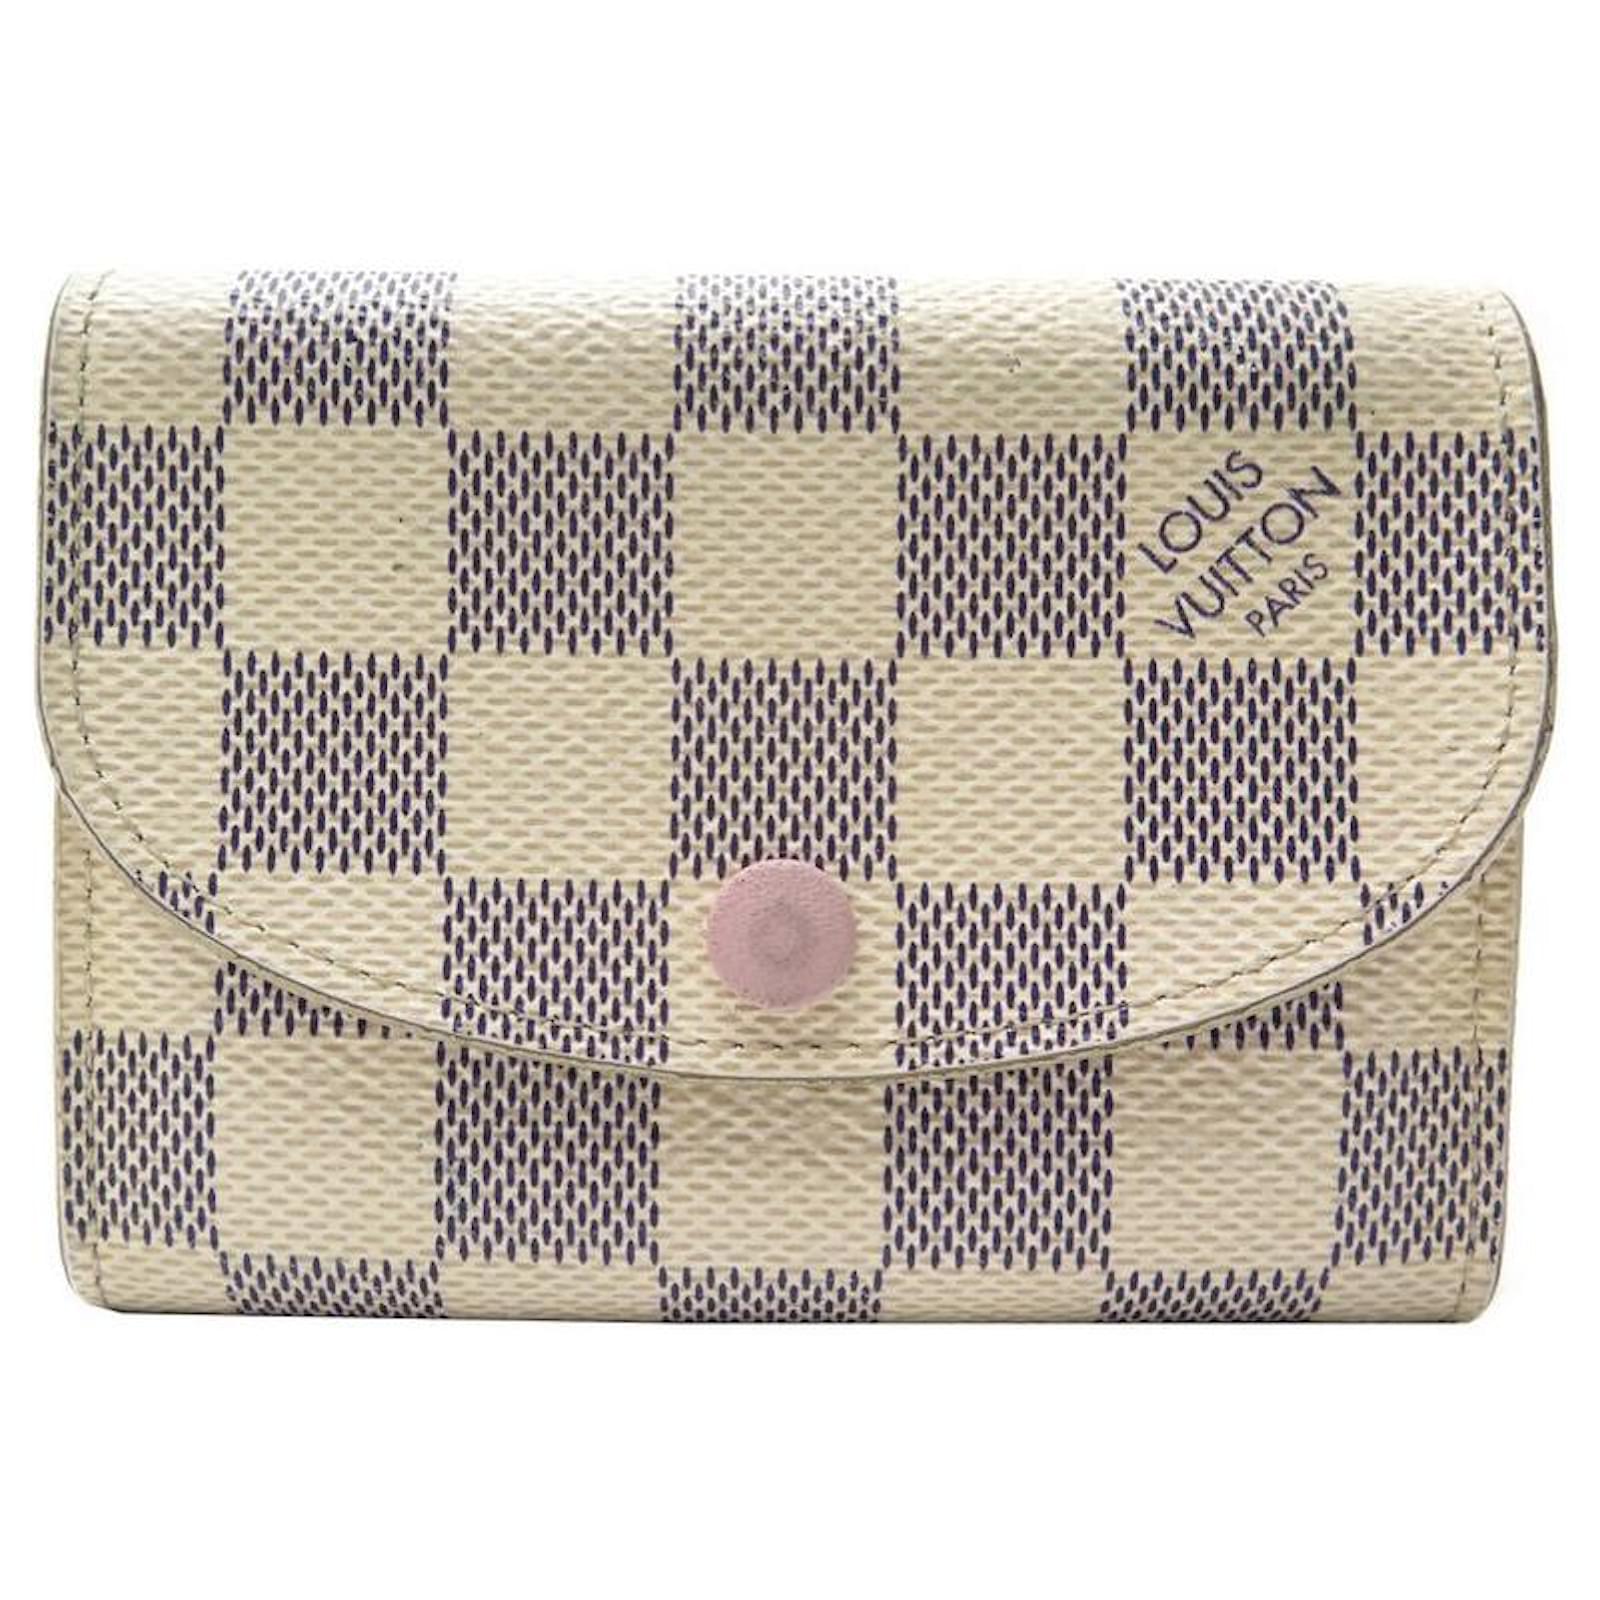 Damier Ebene SMALL LEATHER GOODS WALLETS Rosalie Coin Purse